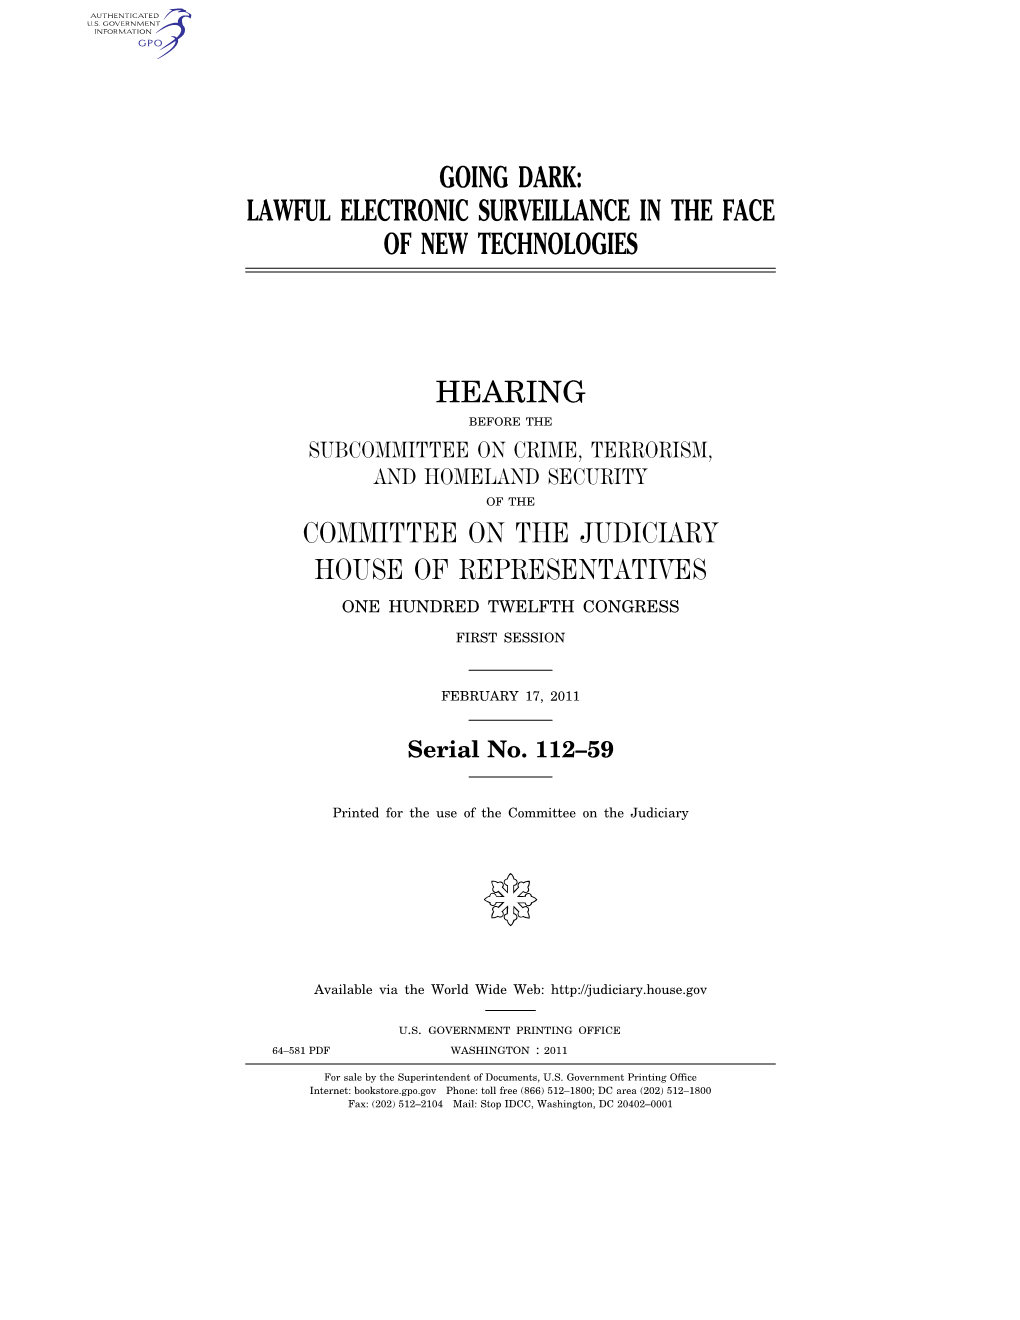 Lawful Electronic Surveillance in the Face of New Technologies Hearing